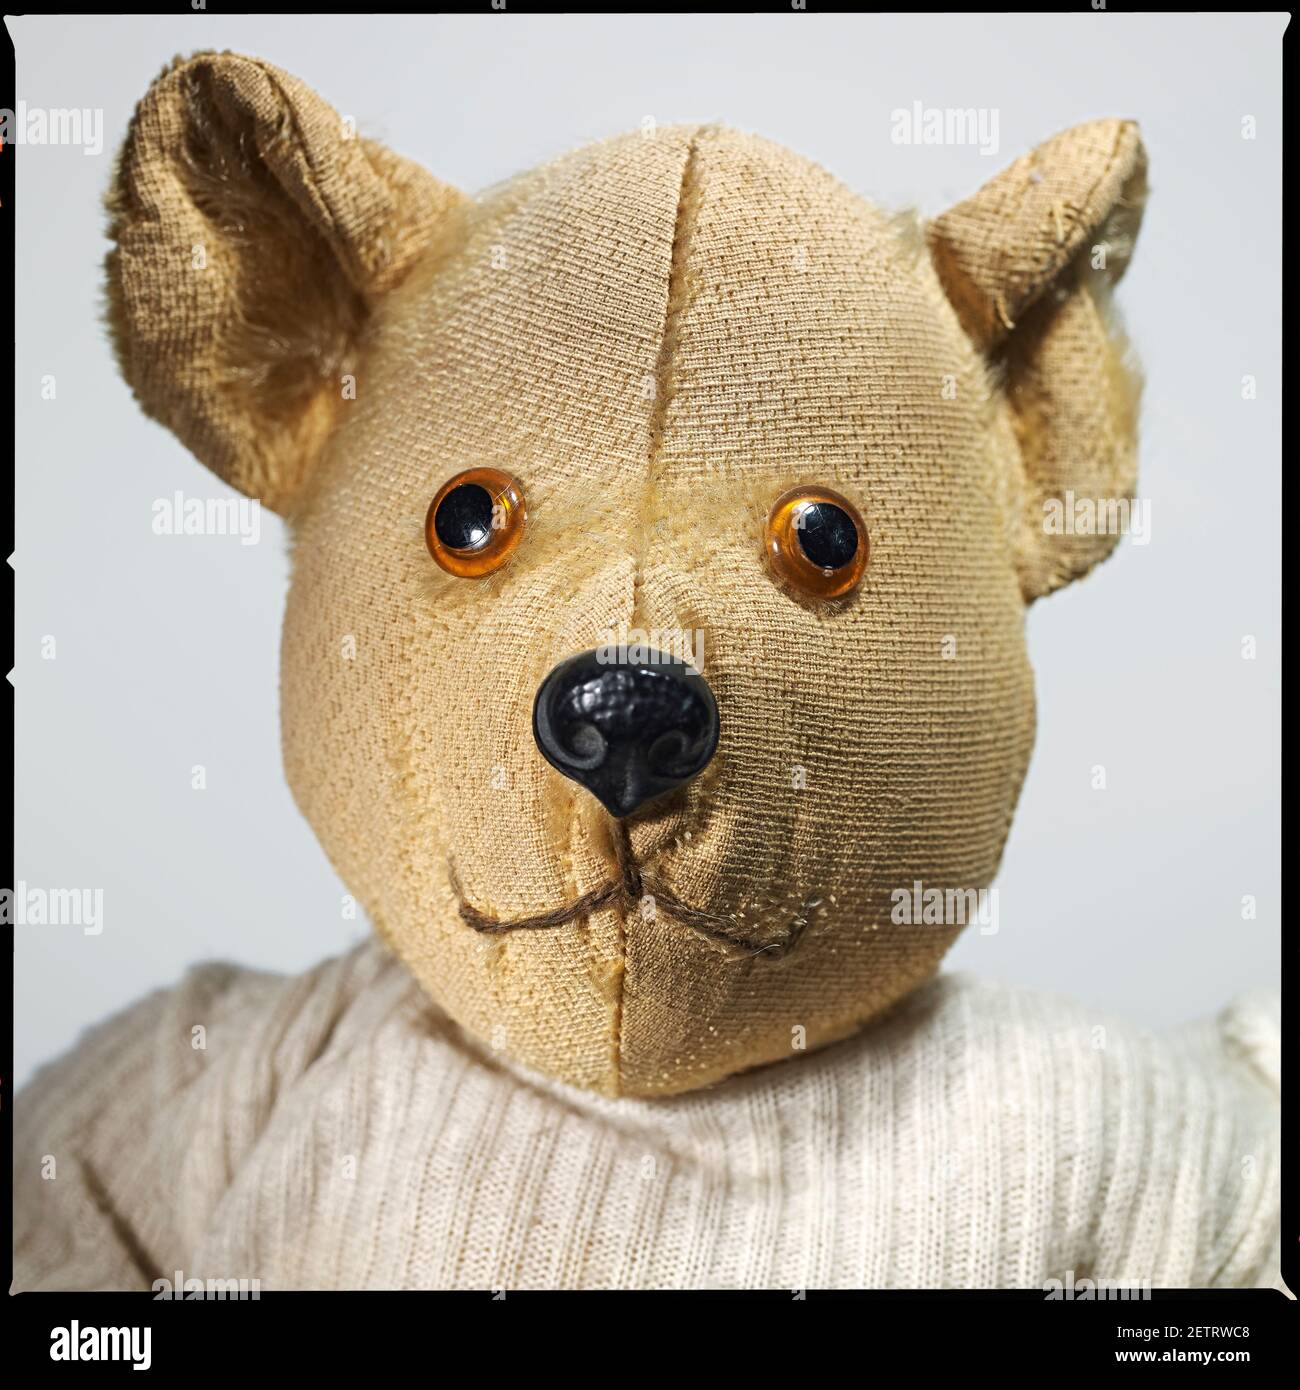 Still Life in the studio of worn and loved childhood teddy bear. Stock Photo